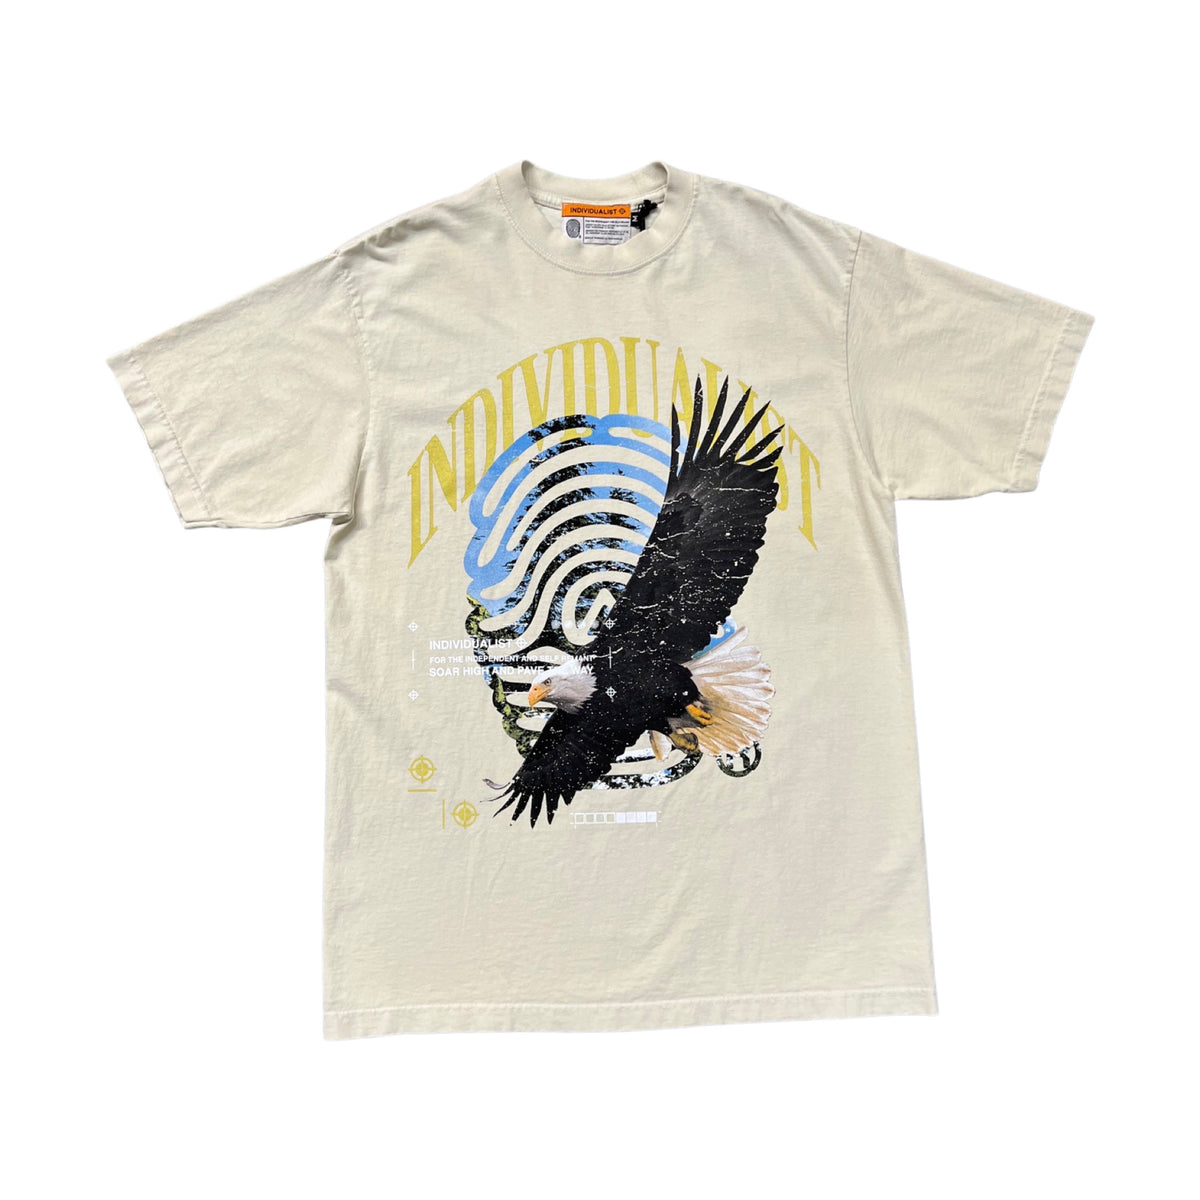 INDIVIDUALIST FLY ALONE TEE